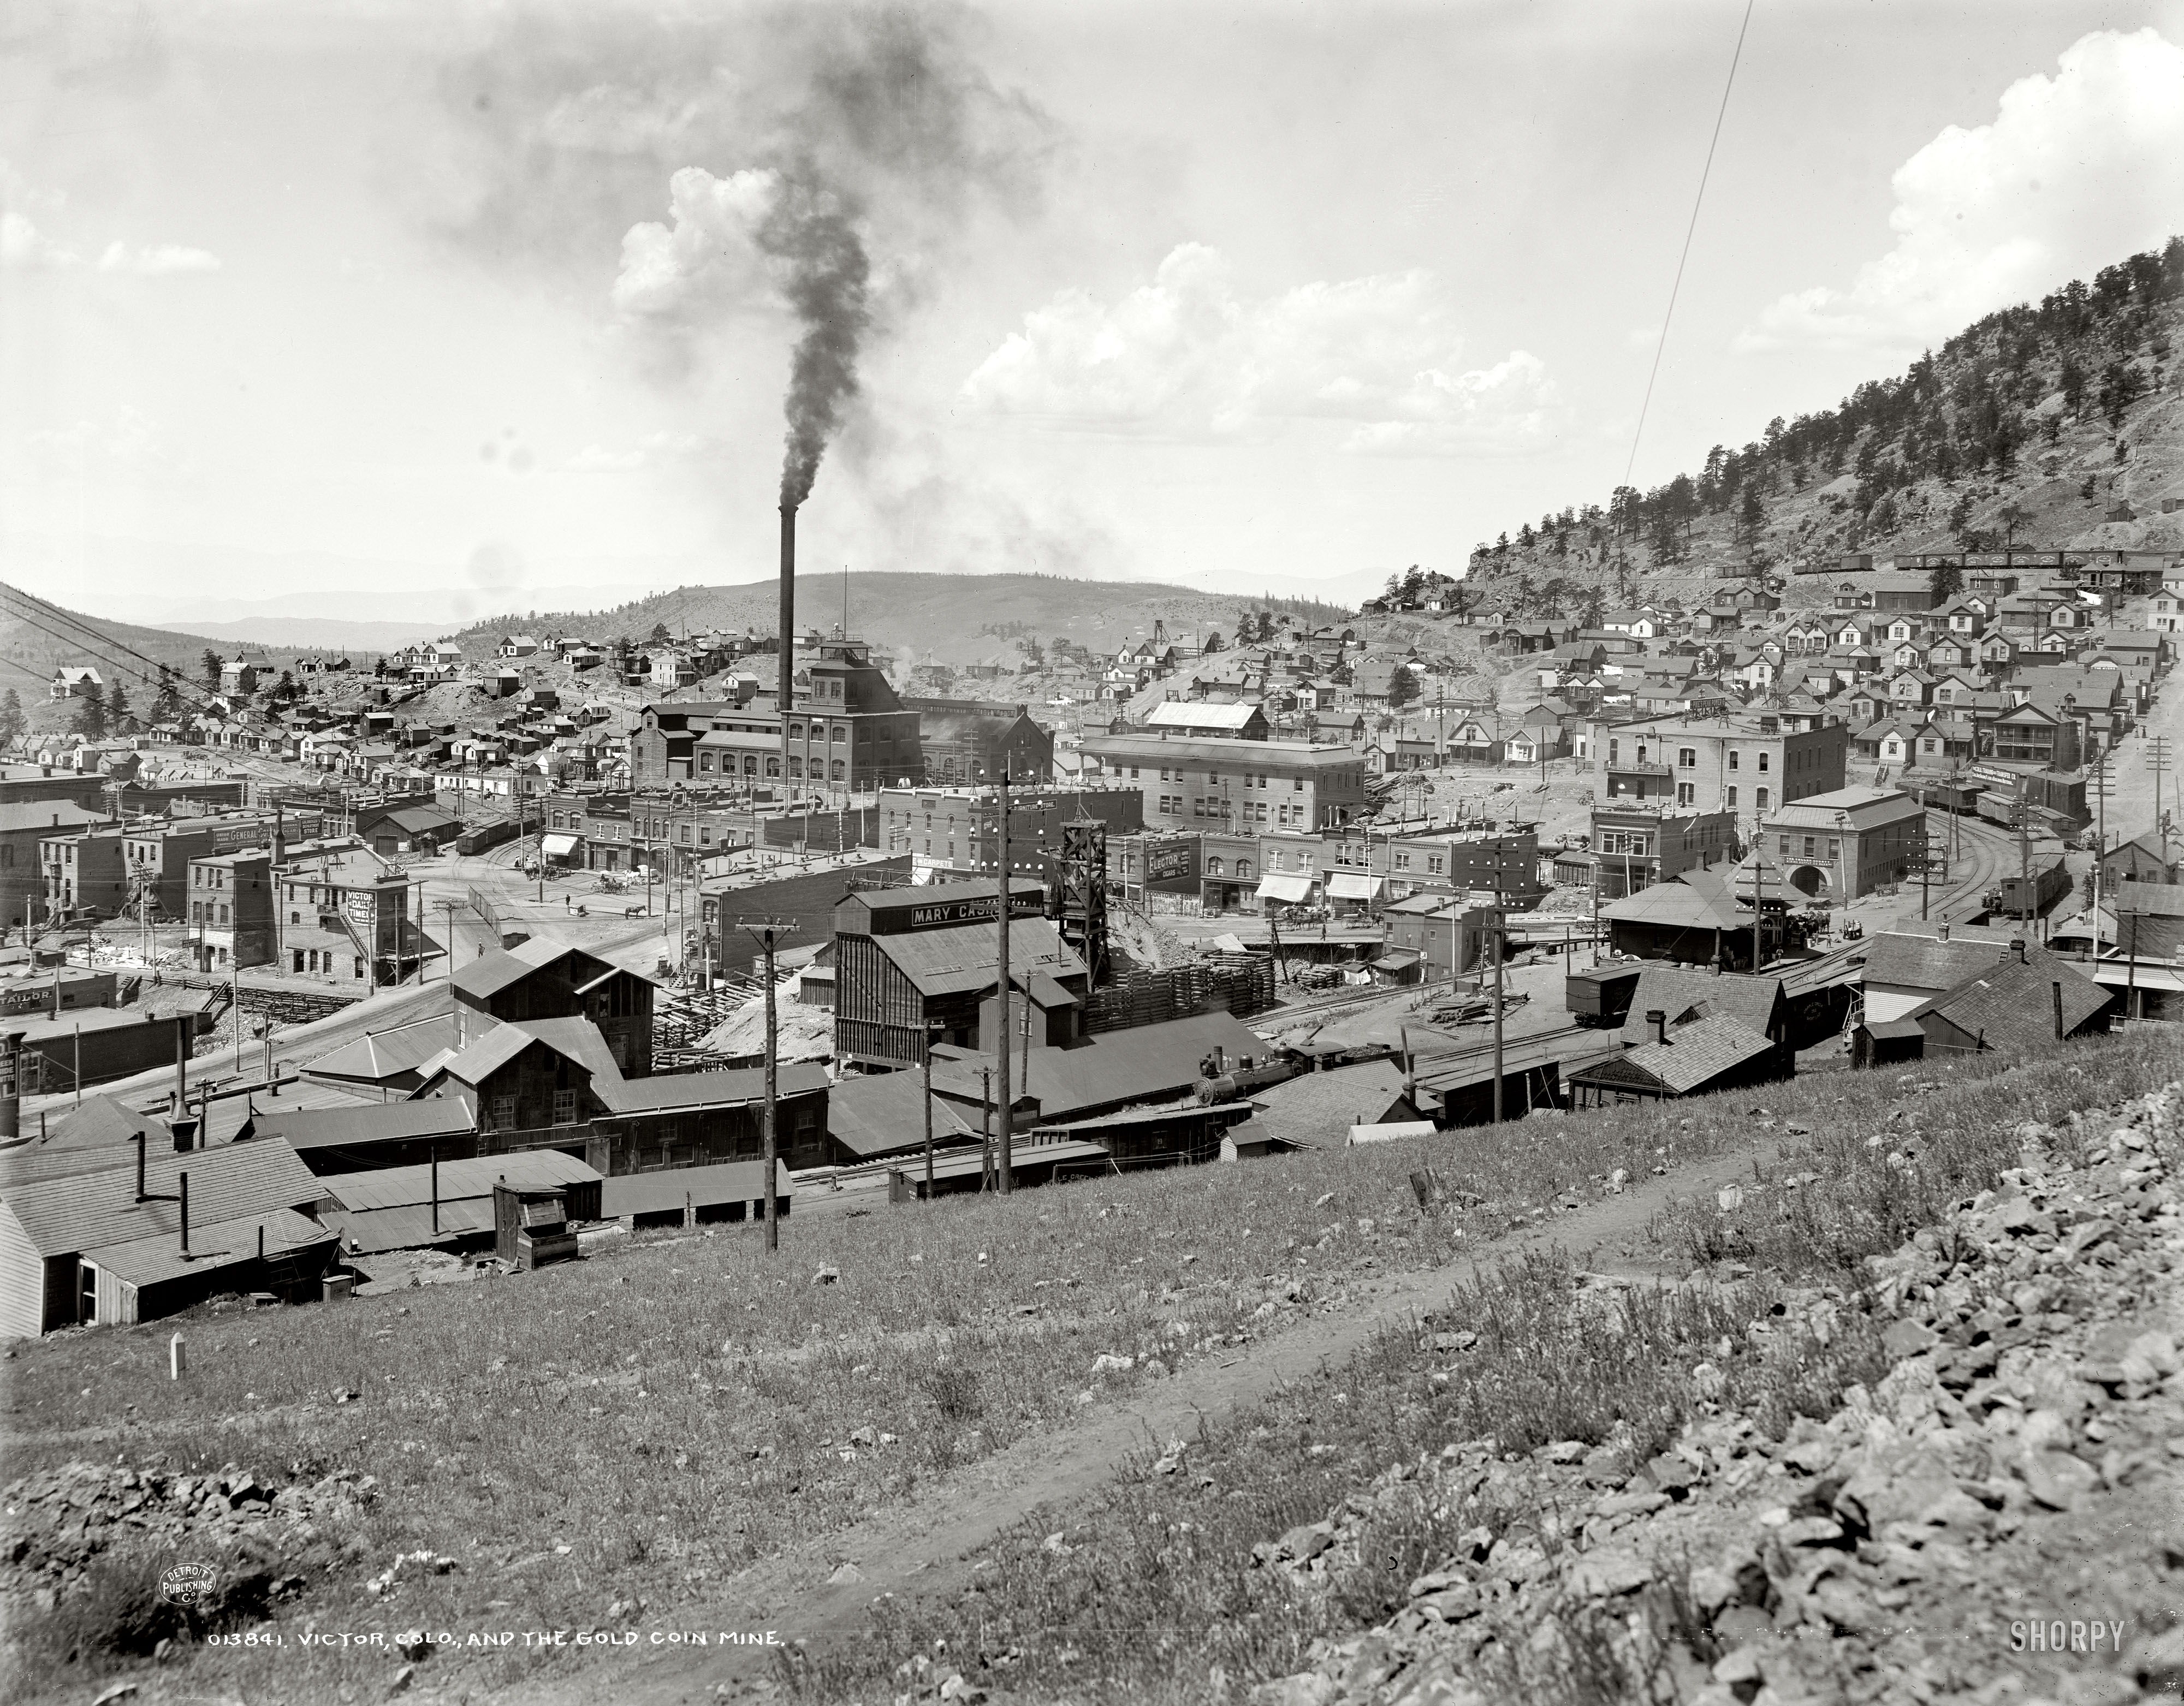 Circa 1900. "Victor, Colorado. Gold Coin Mine." 8x10 inch dry plate glass negative, Detroit Publishing Company. View full size.